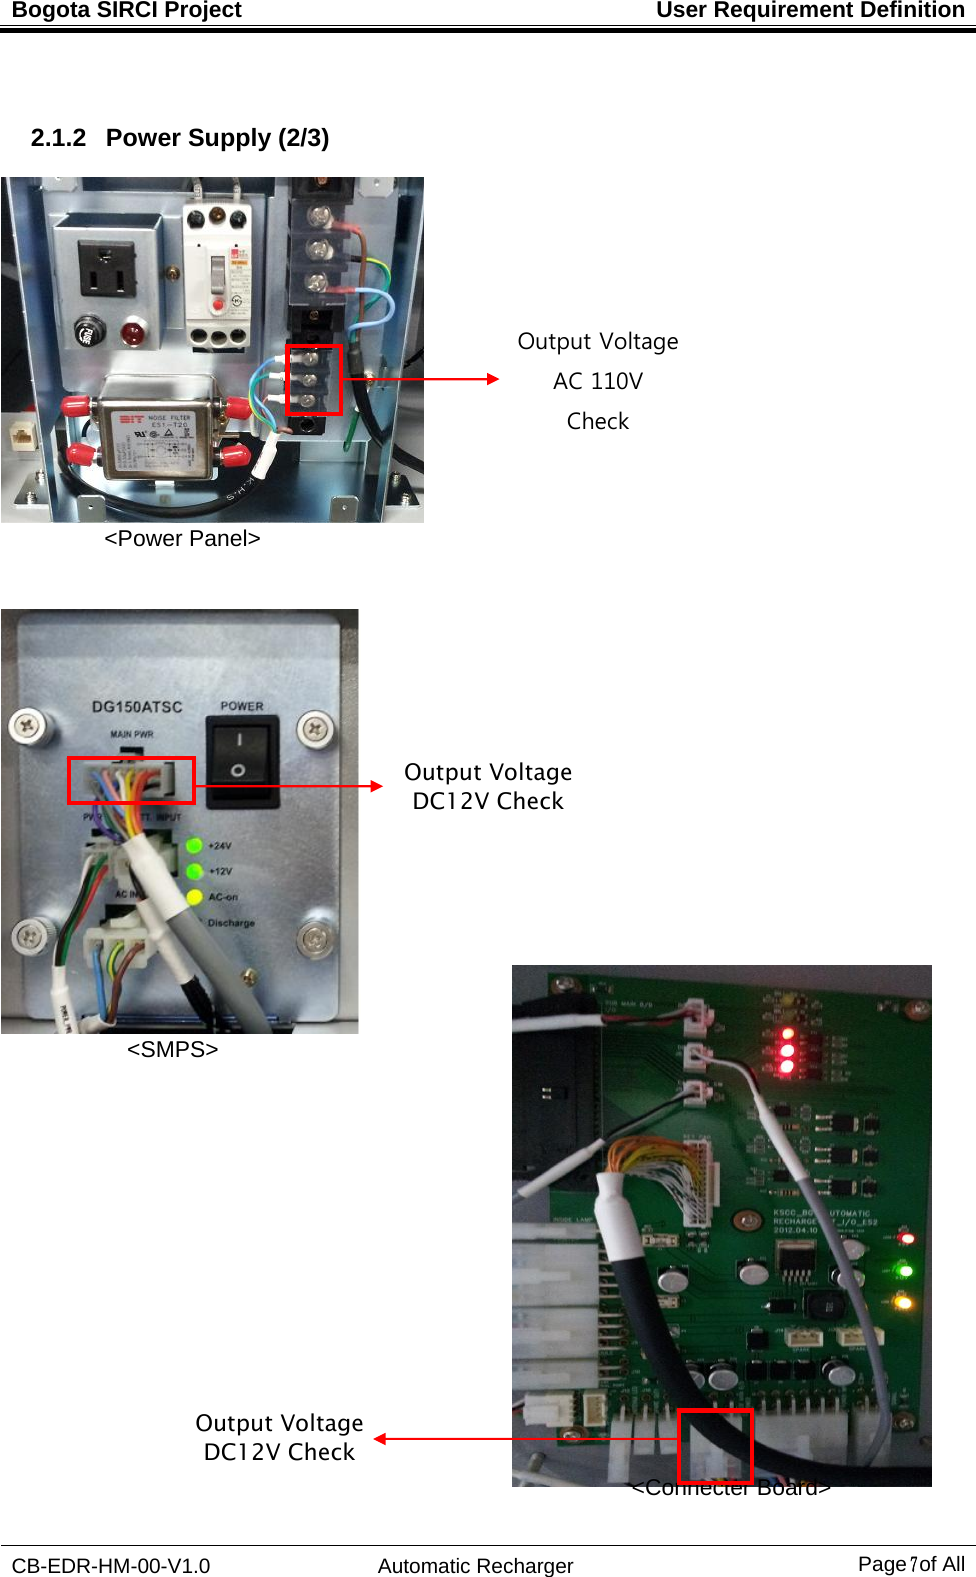 Bogota SIRCI Project  User Requirement Definition CB-EDR-HM-00-V1.0 Automatic Recharger Page７ of All  2.1.2   Power Supply (2/3)  &lt;Power Panel&gt;                        &lt;SMPS&gt;                                                                                                              &lt;Connecter Board&gt; Output Voltage   AC 110V Check Output Voltage DC12V Check Output Voltage DC12V Check 